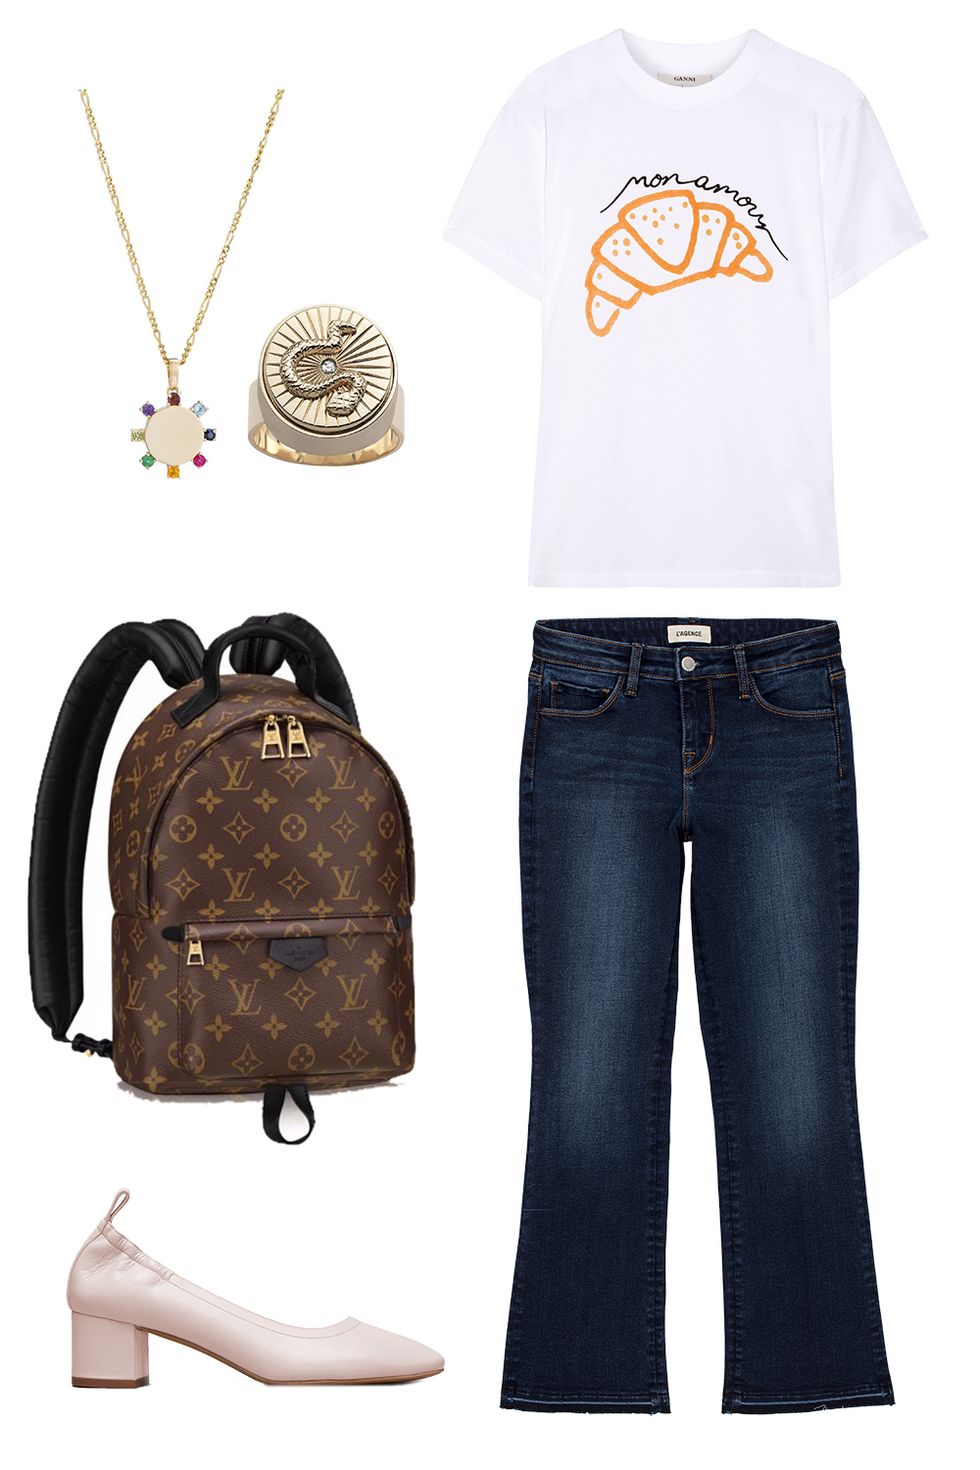 Summer dress in fall  Mini backpack outfit, Louis vuitton palm